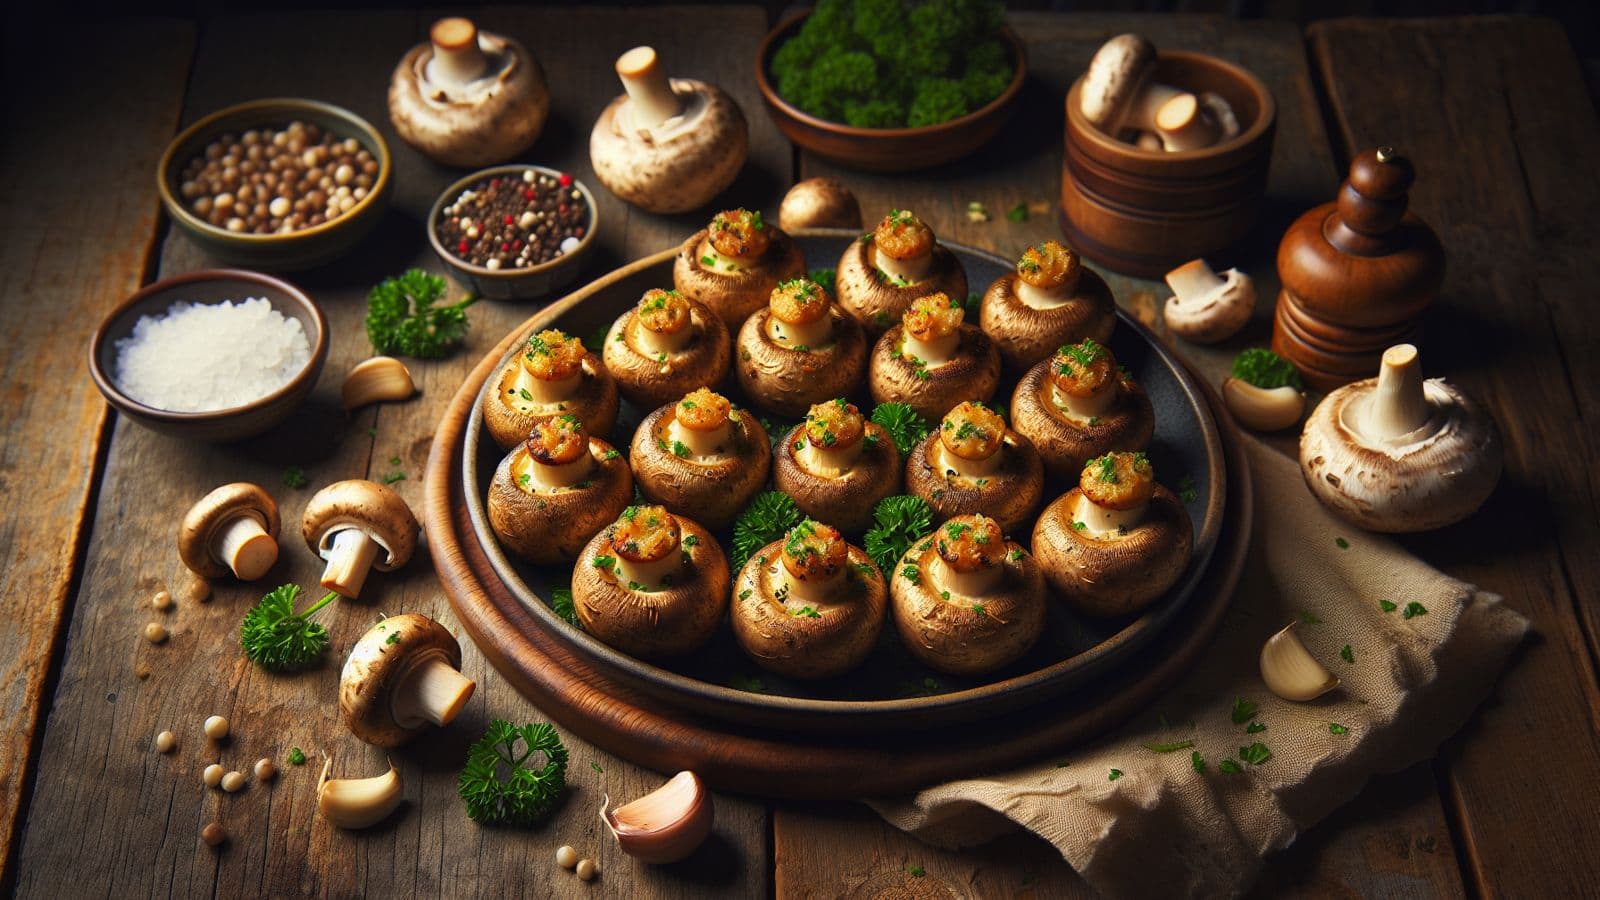 Recipe: This gourmet garlic-stuffed mushrooms will impress your guests